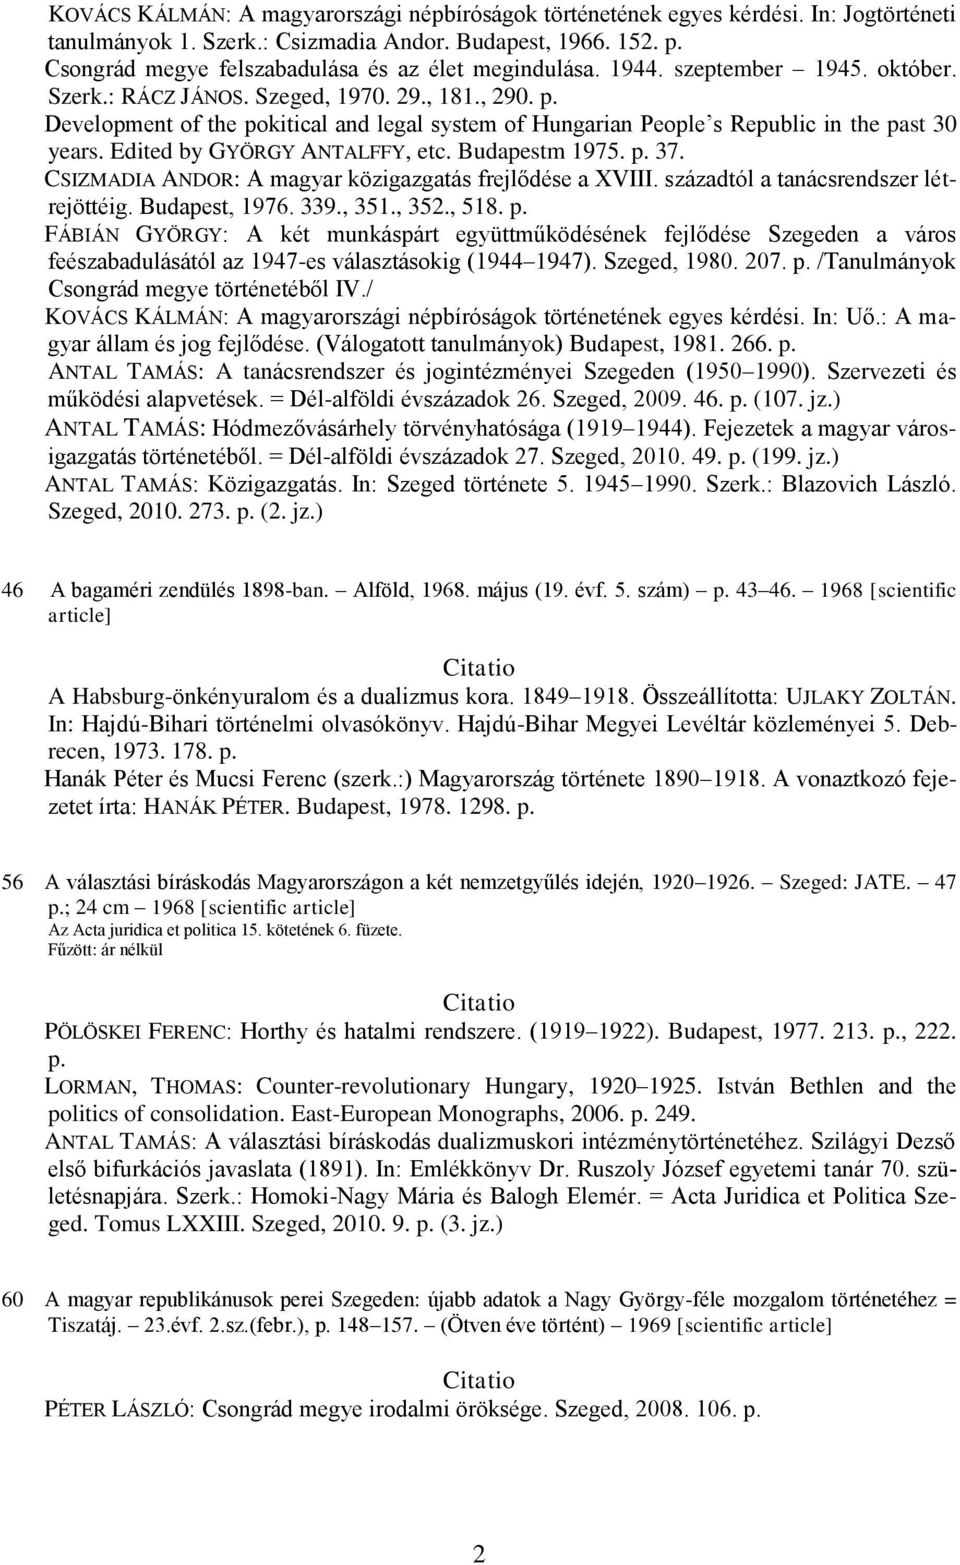 Development of the pokitical and legal system of Hungarian People s Republic in the past 30 years. Edited by GYÖRGY ANTALFFY, etc. Budapestm 1975. p. 37.